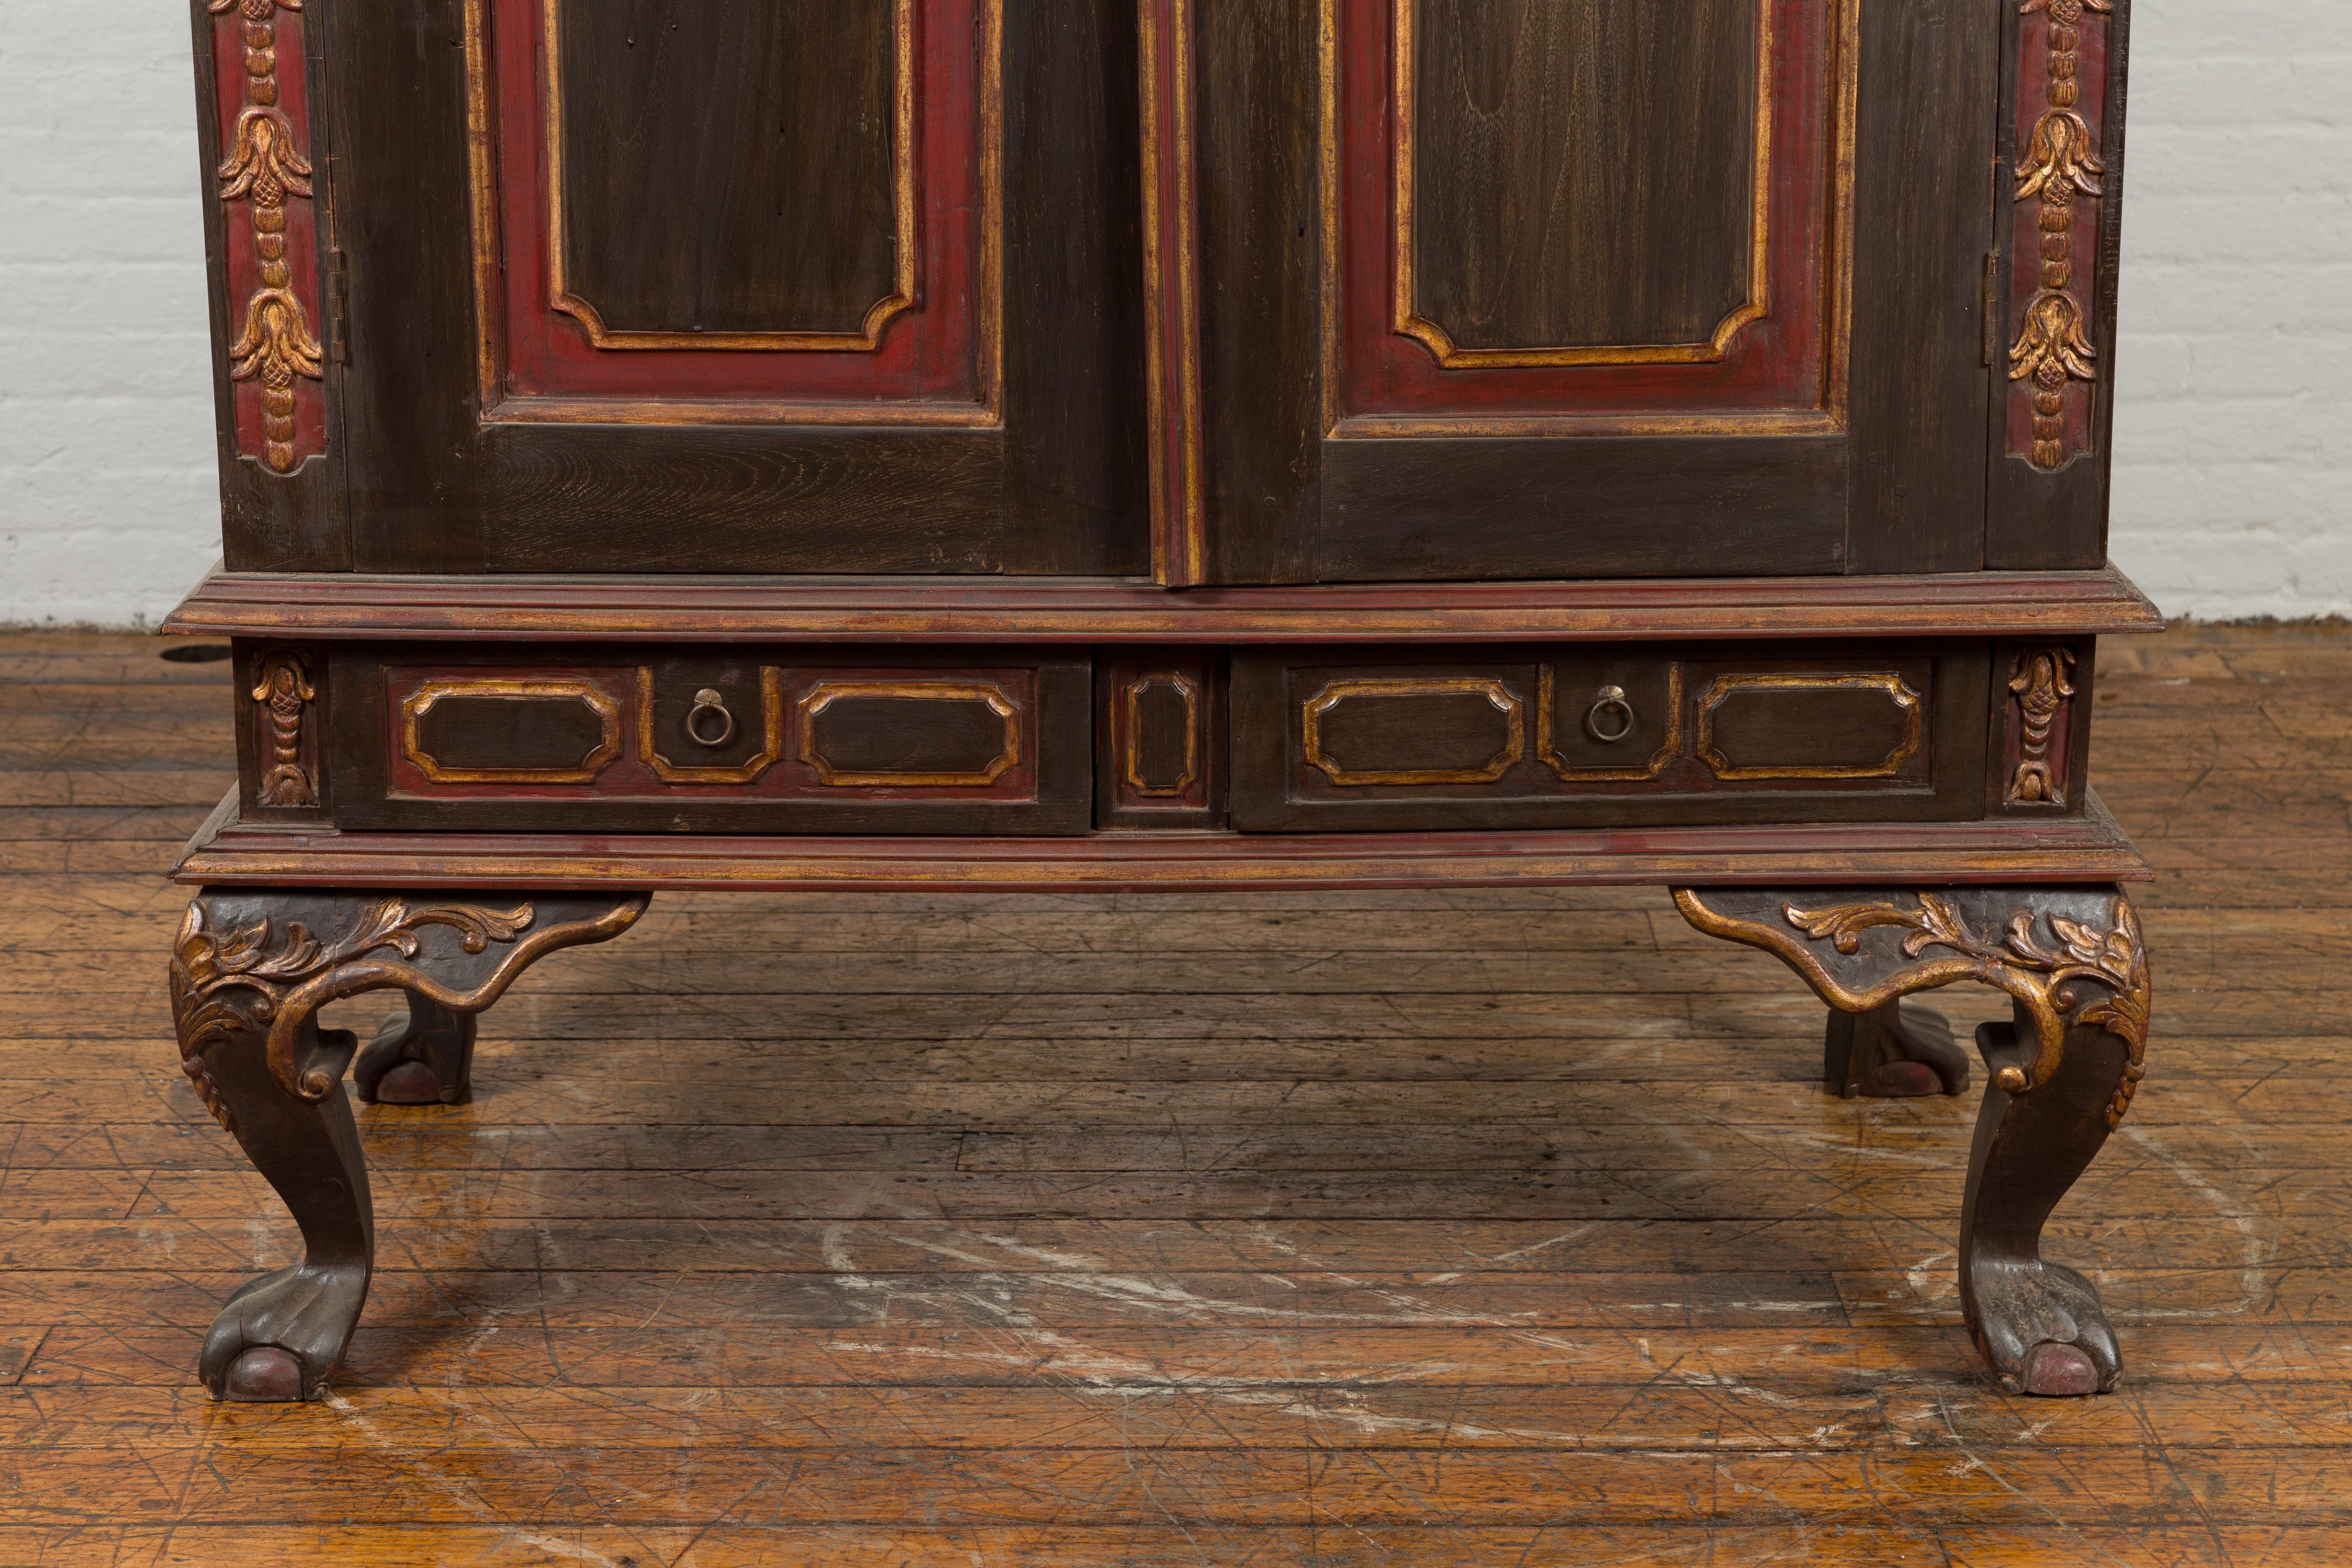 Dutch Colonial Early 20th Century Cabinet with Bonnet Top and Cabriole Legs For Sale 3